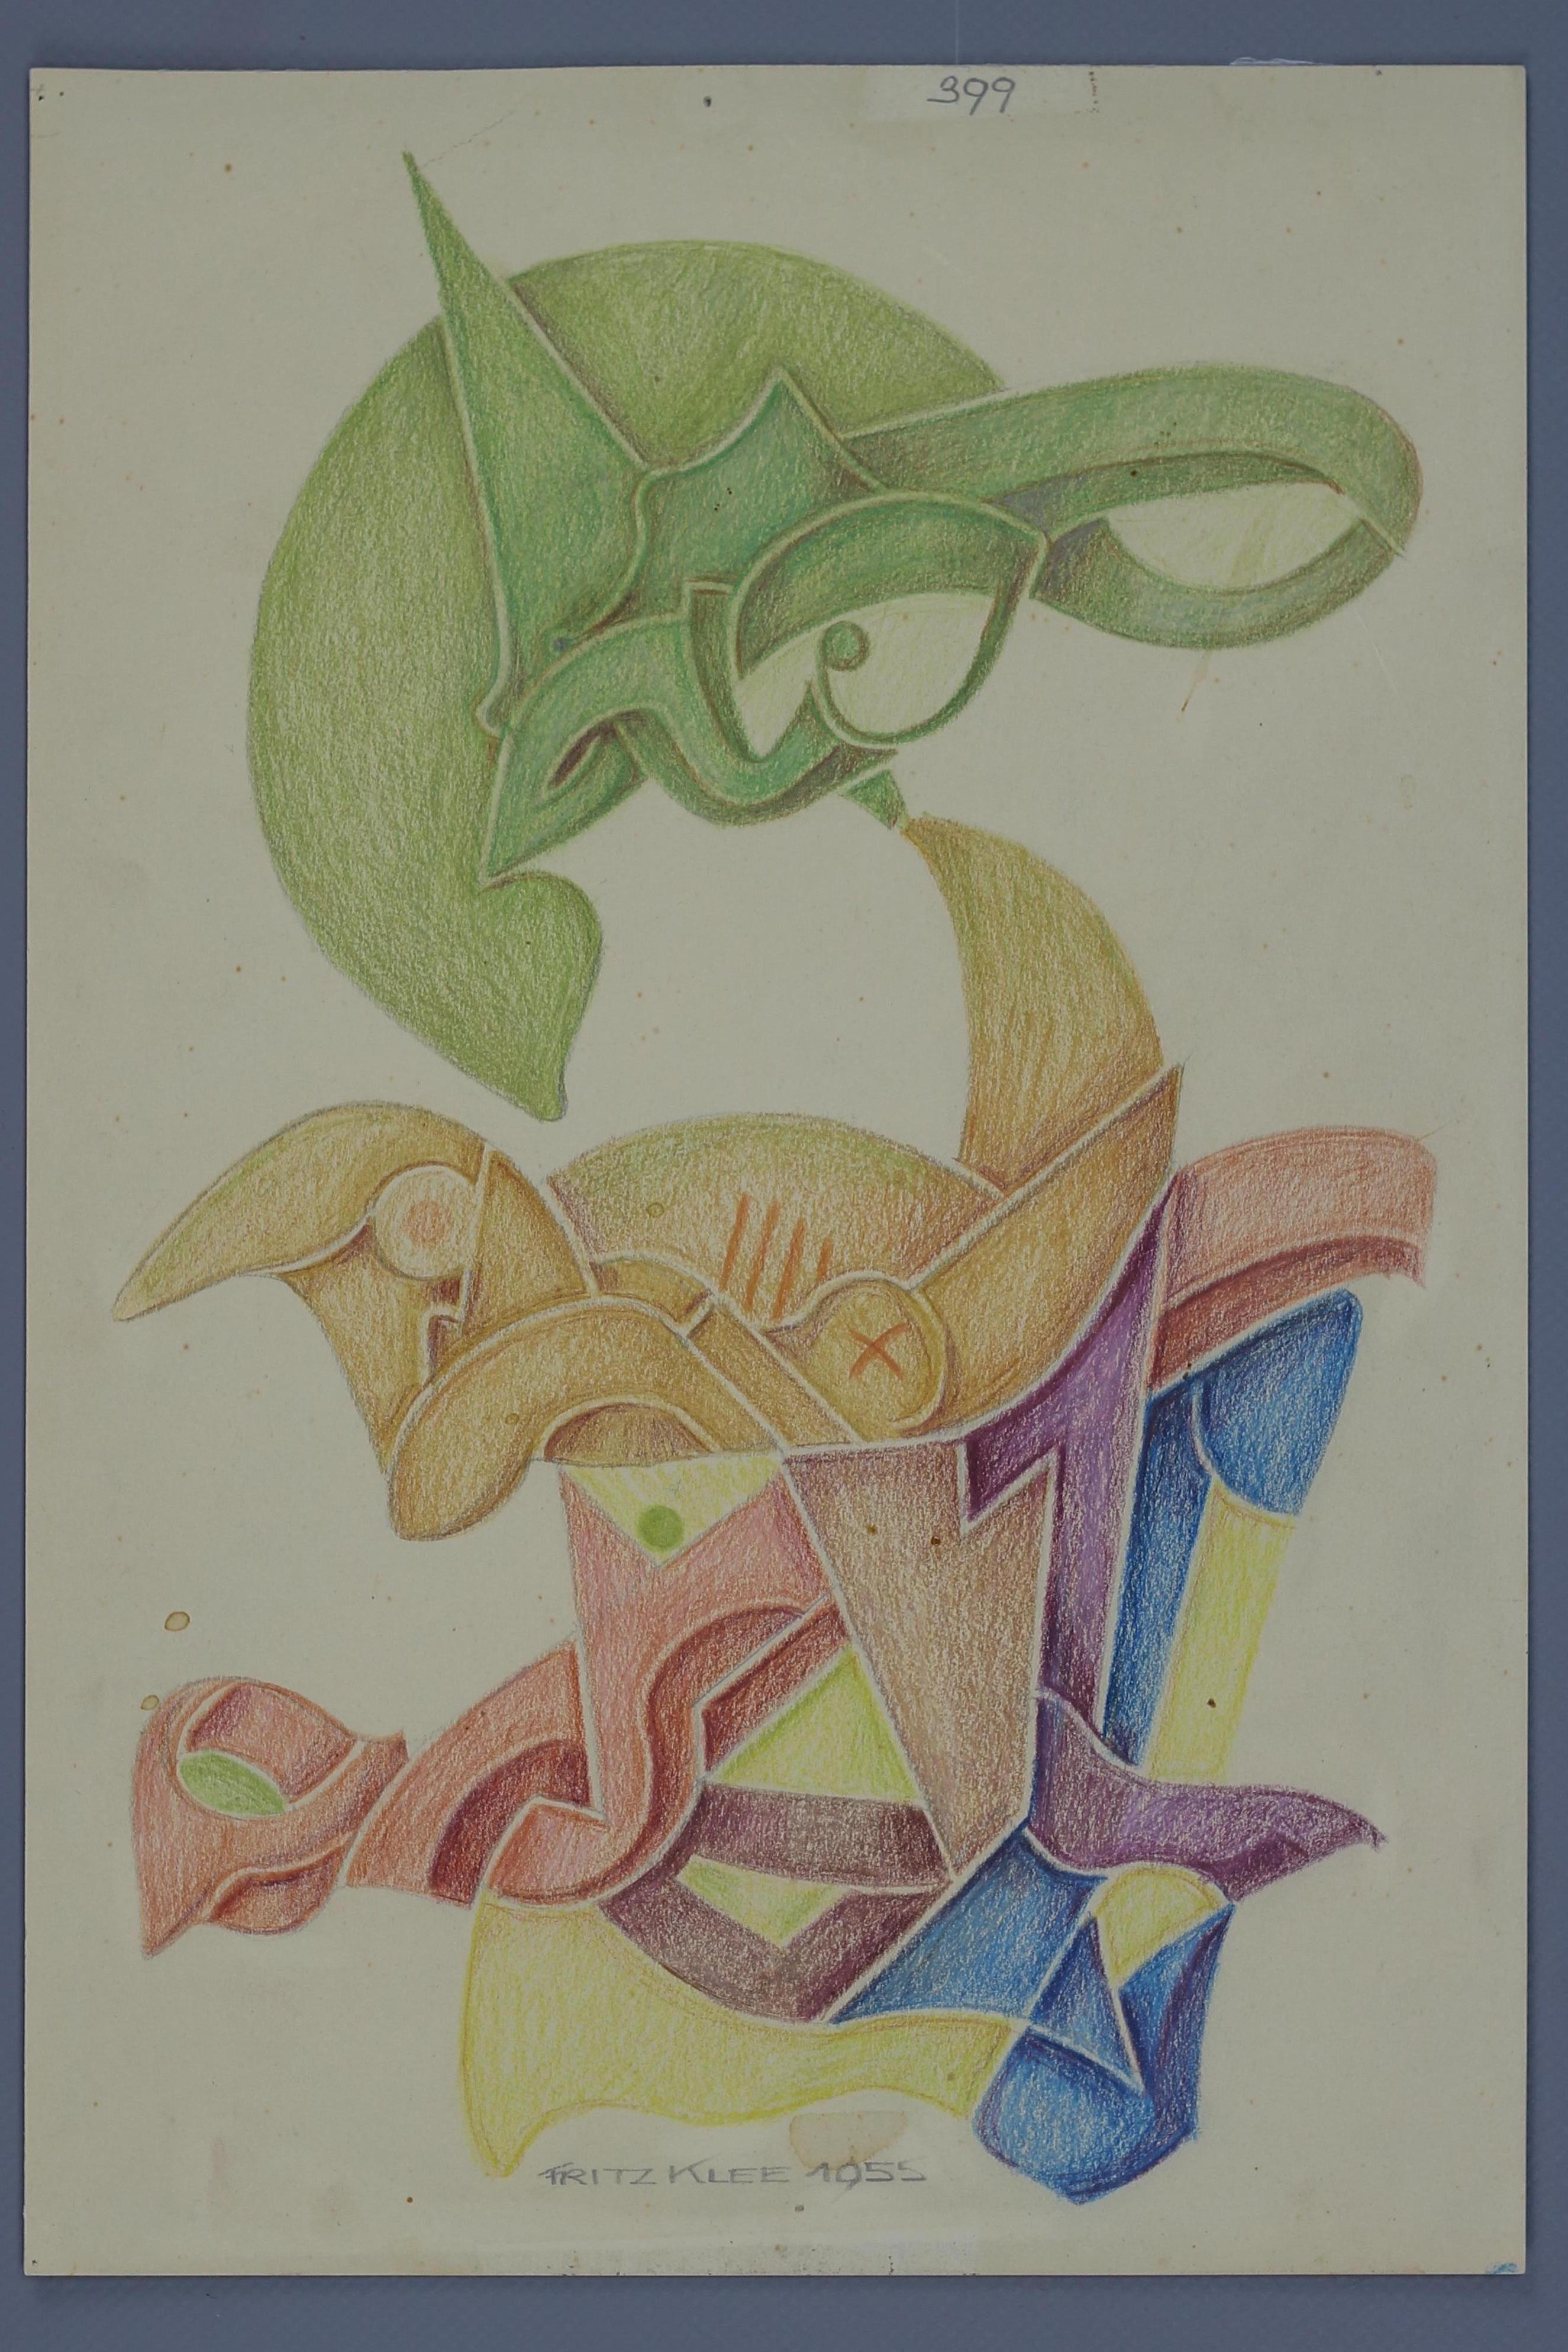 A magnificent abstract organic hand-drawing, a draft of an ornamental composition in strong, bright colors by Fritz Klee. Colored pencils on paper, signed and dated 'Fritz Klee 1955', numbered on top.
Sheet size: 32 cm x 22 cm / 12.6 in x 8.66